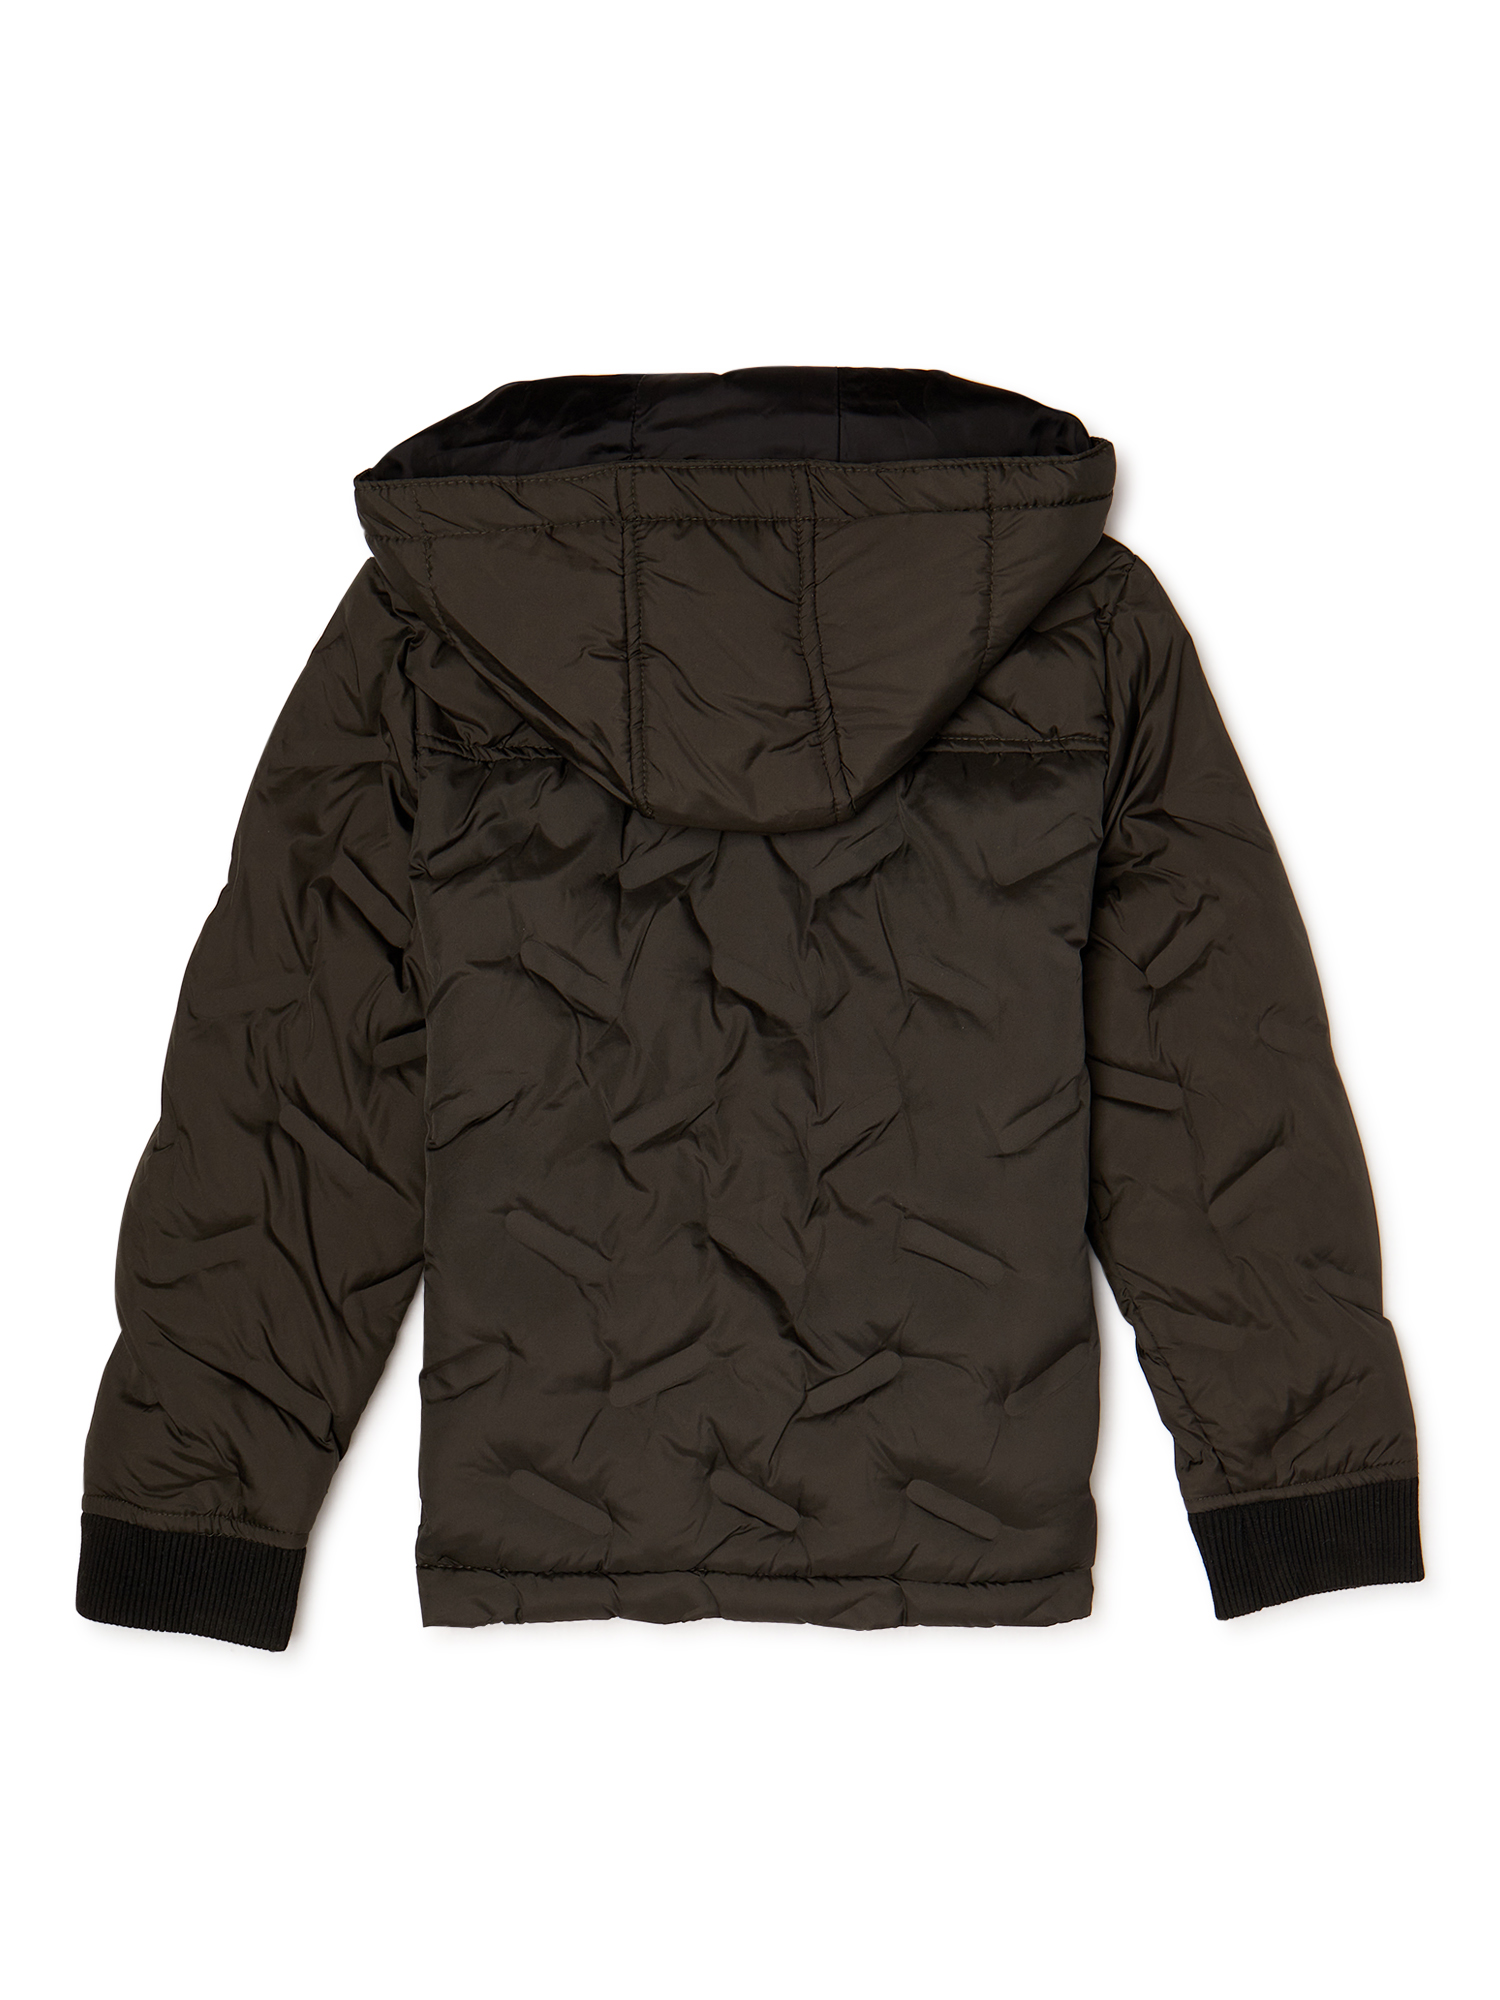 Urban Republic 'Heat Seal' Quilted Jacket with Zip Off Hood, Sizes 4-20 - image 2 of 3